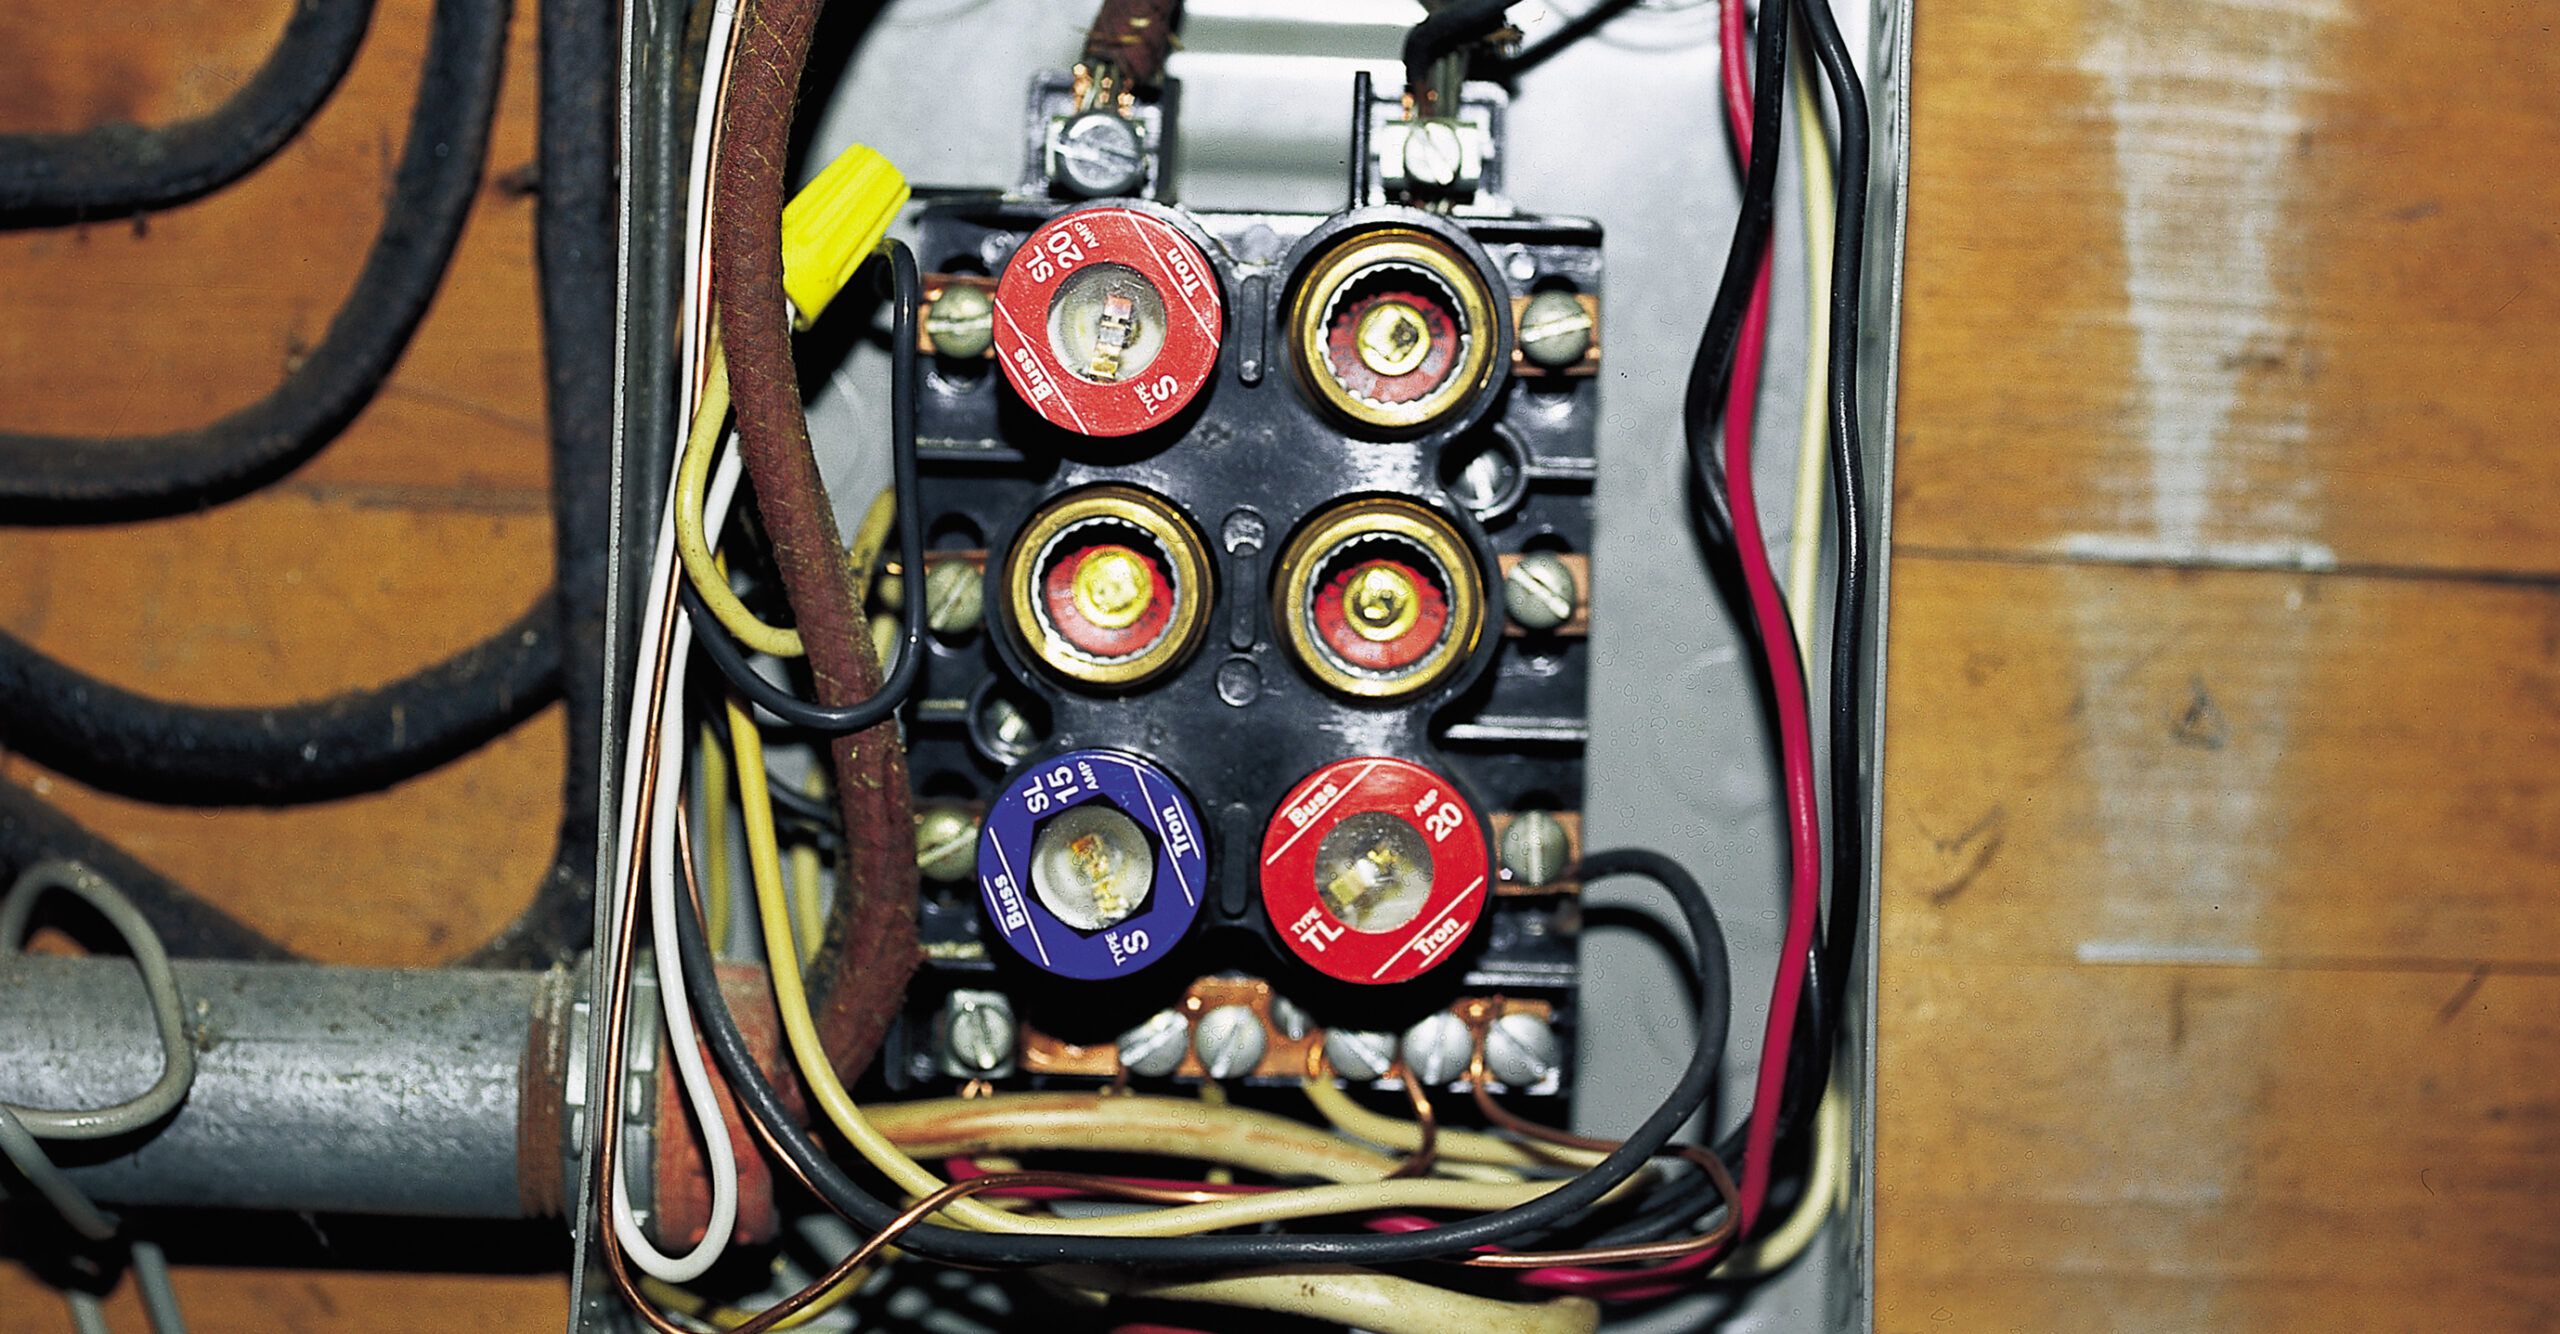 Unplug the power supply from the console and the wall outlet.
Inspect the power supply for any damage or frayed wires.